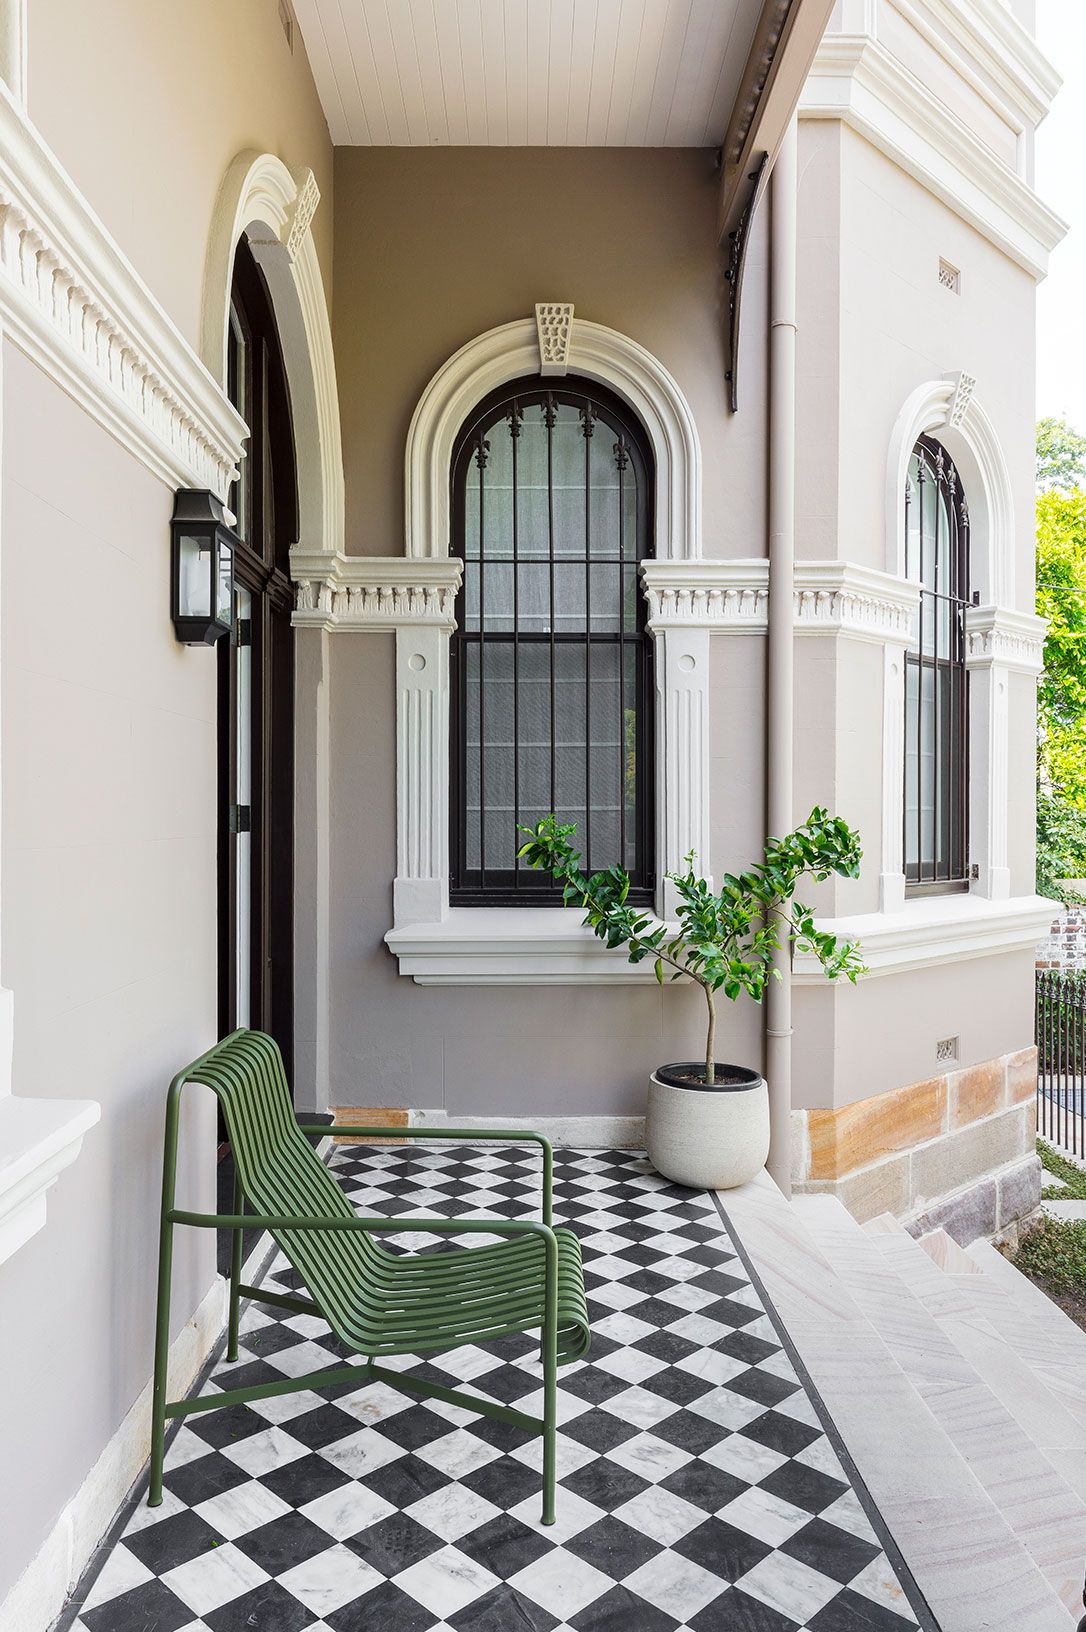 50 Charming Front Porch Ideas - Porch Design and Decorating Tips